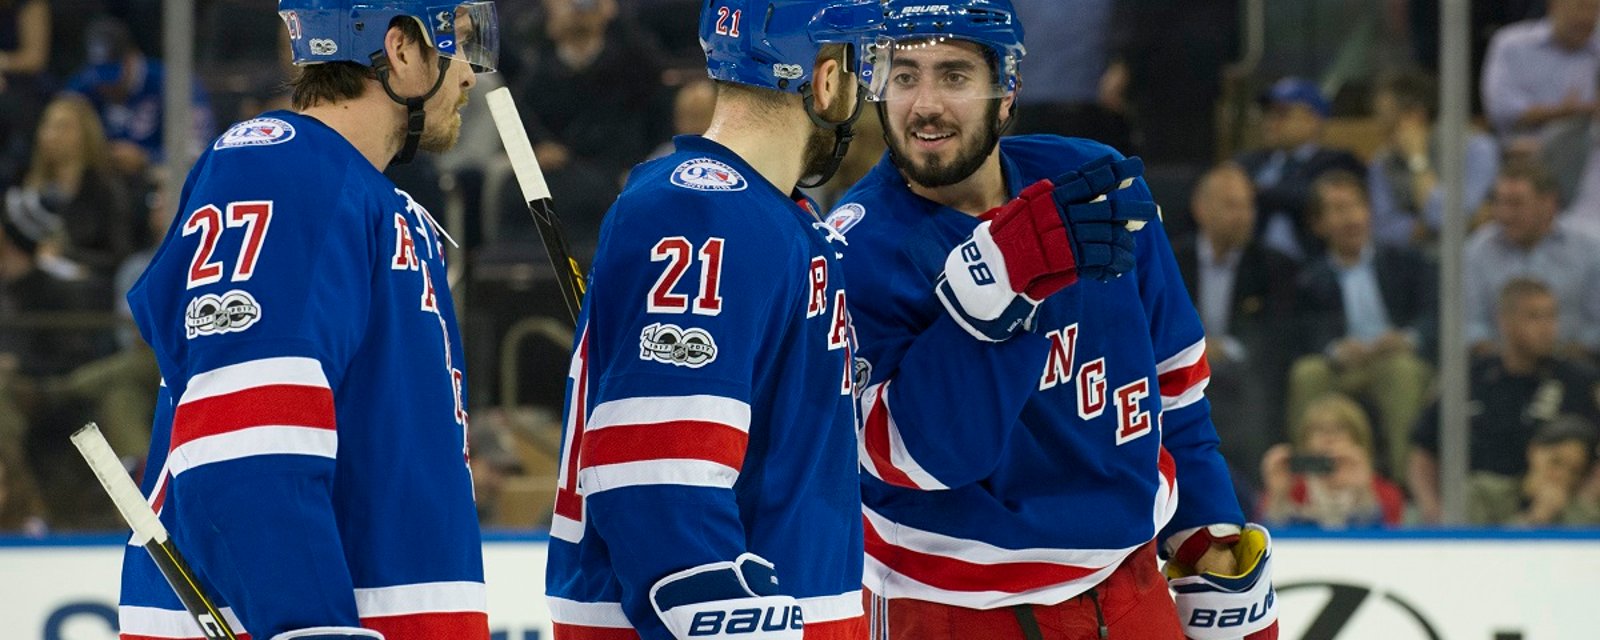 Rangers veteran may be the odd man out after early playoff exit.